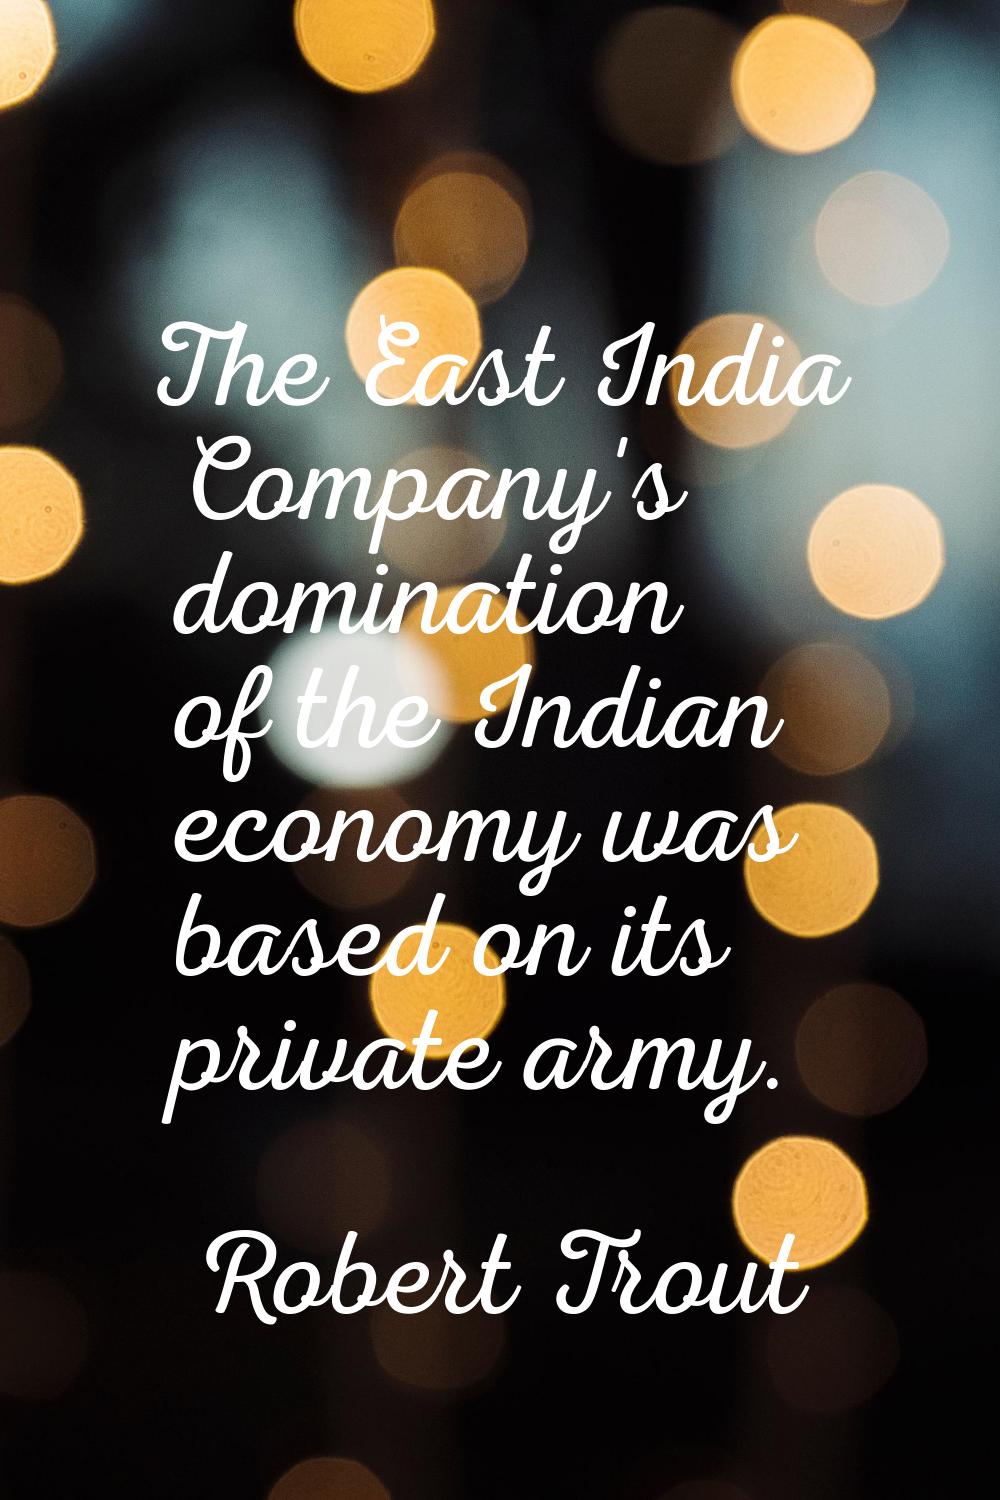 The East India Company's domination of the Indian economy was based on its private army.